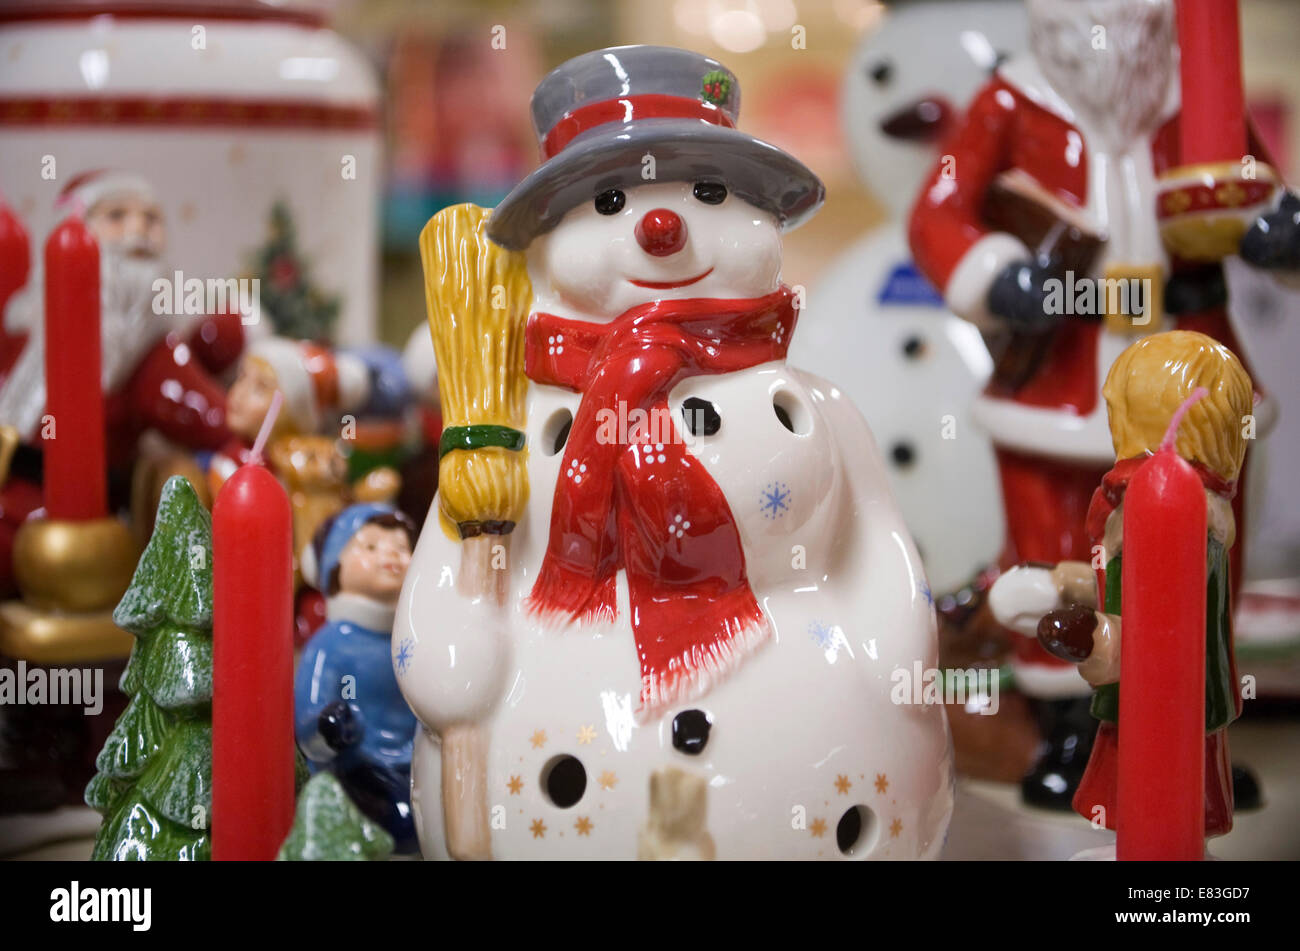 Christmas snowman china figurine decoration with other decorations made by Villeroy & Boch behind. Stock Photo